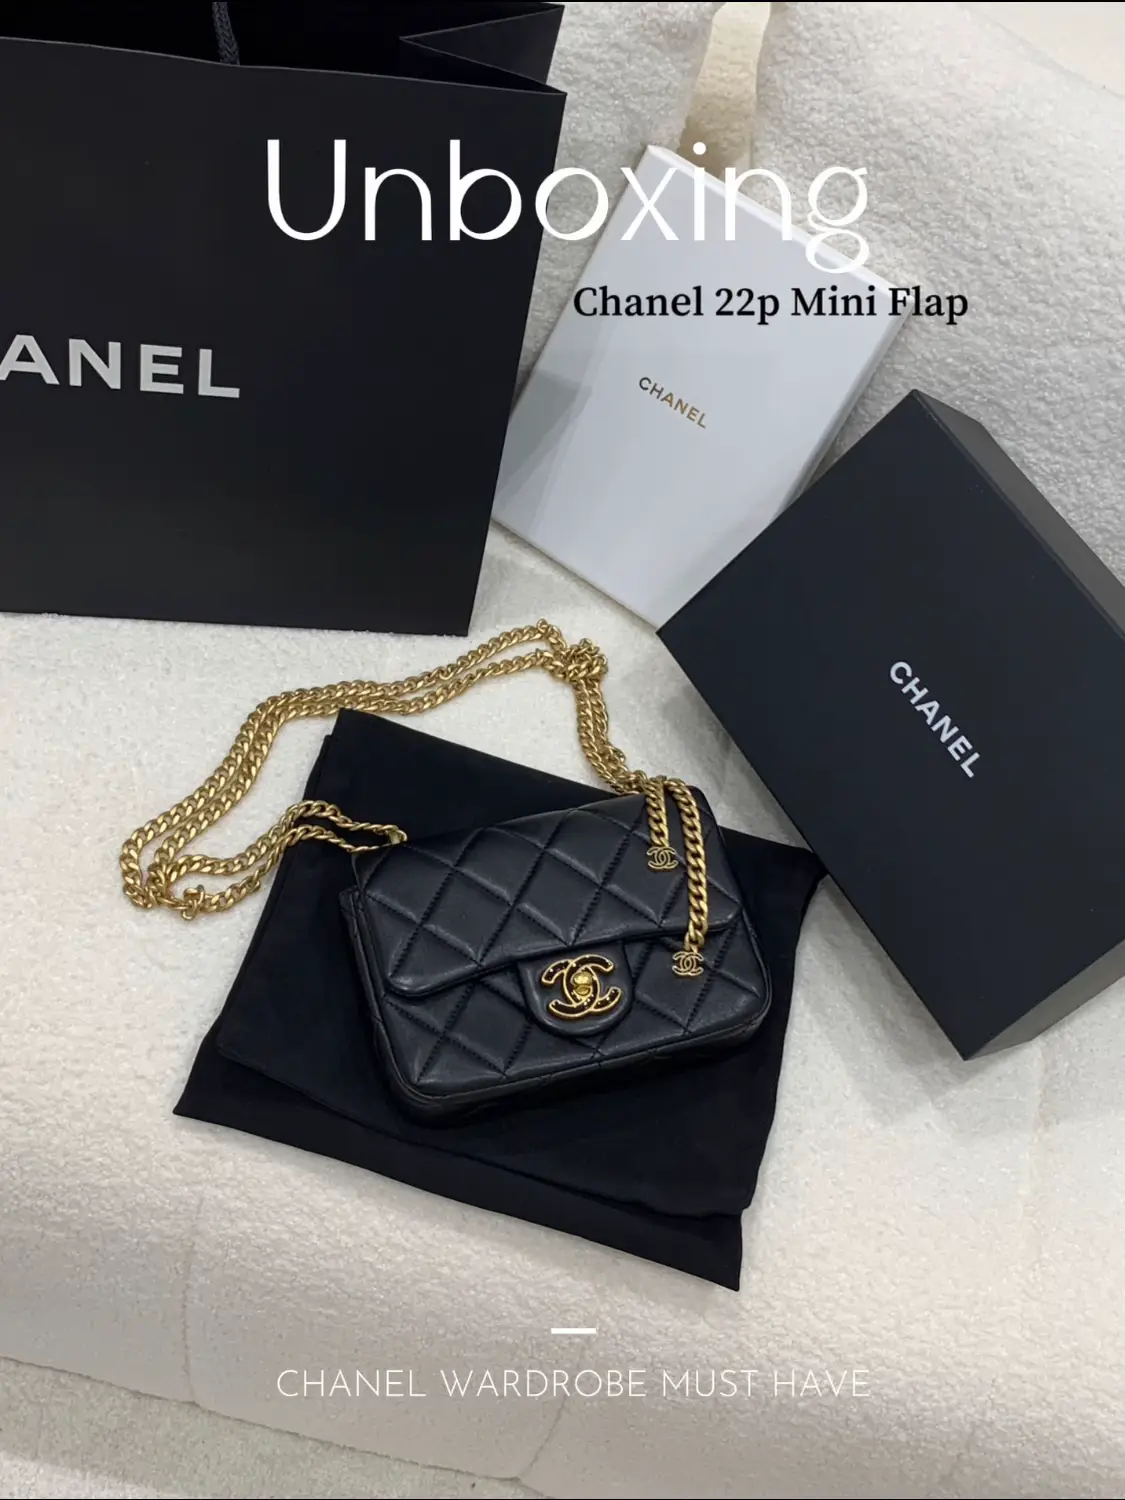 🇲🇾Unboxing Chanel 22p Mini Flap 🖤, Article posted by DM Luxshop